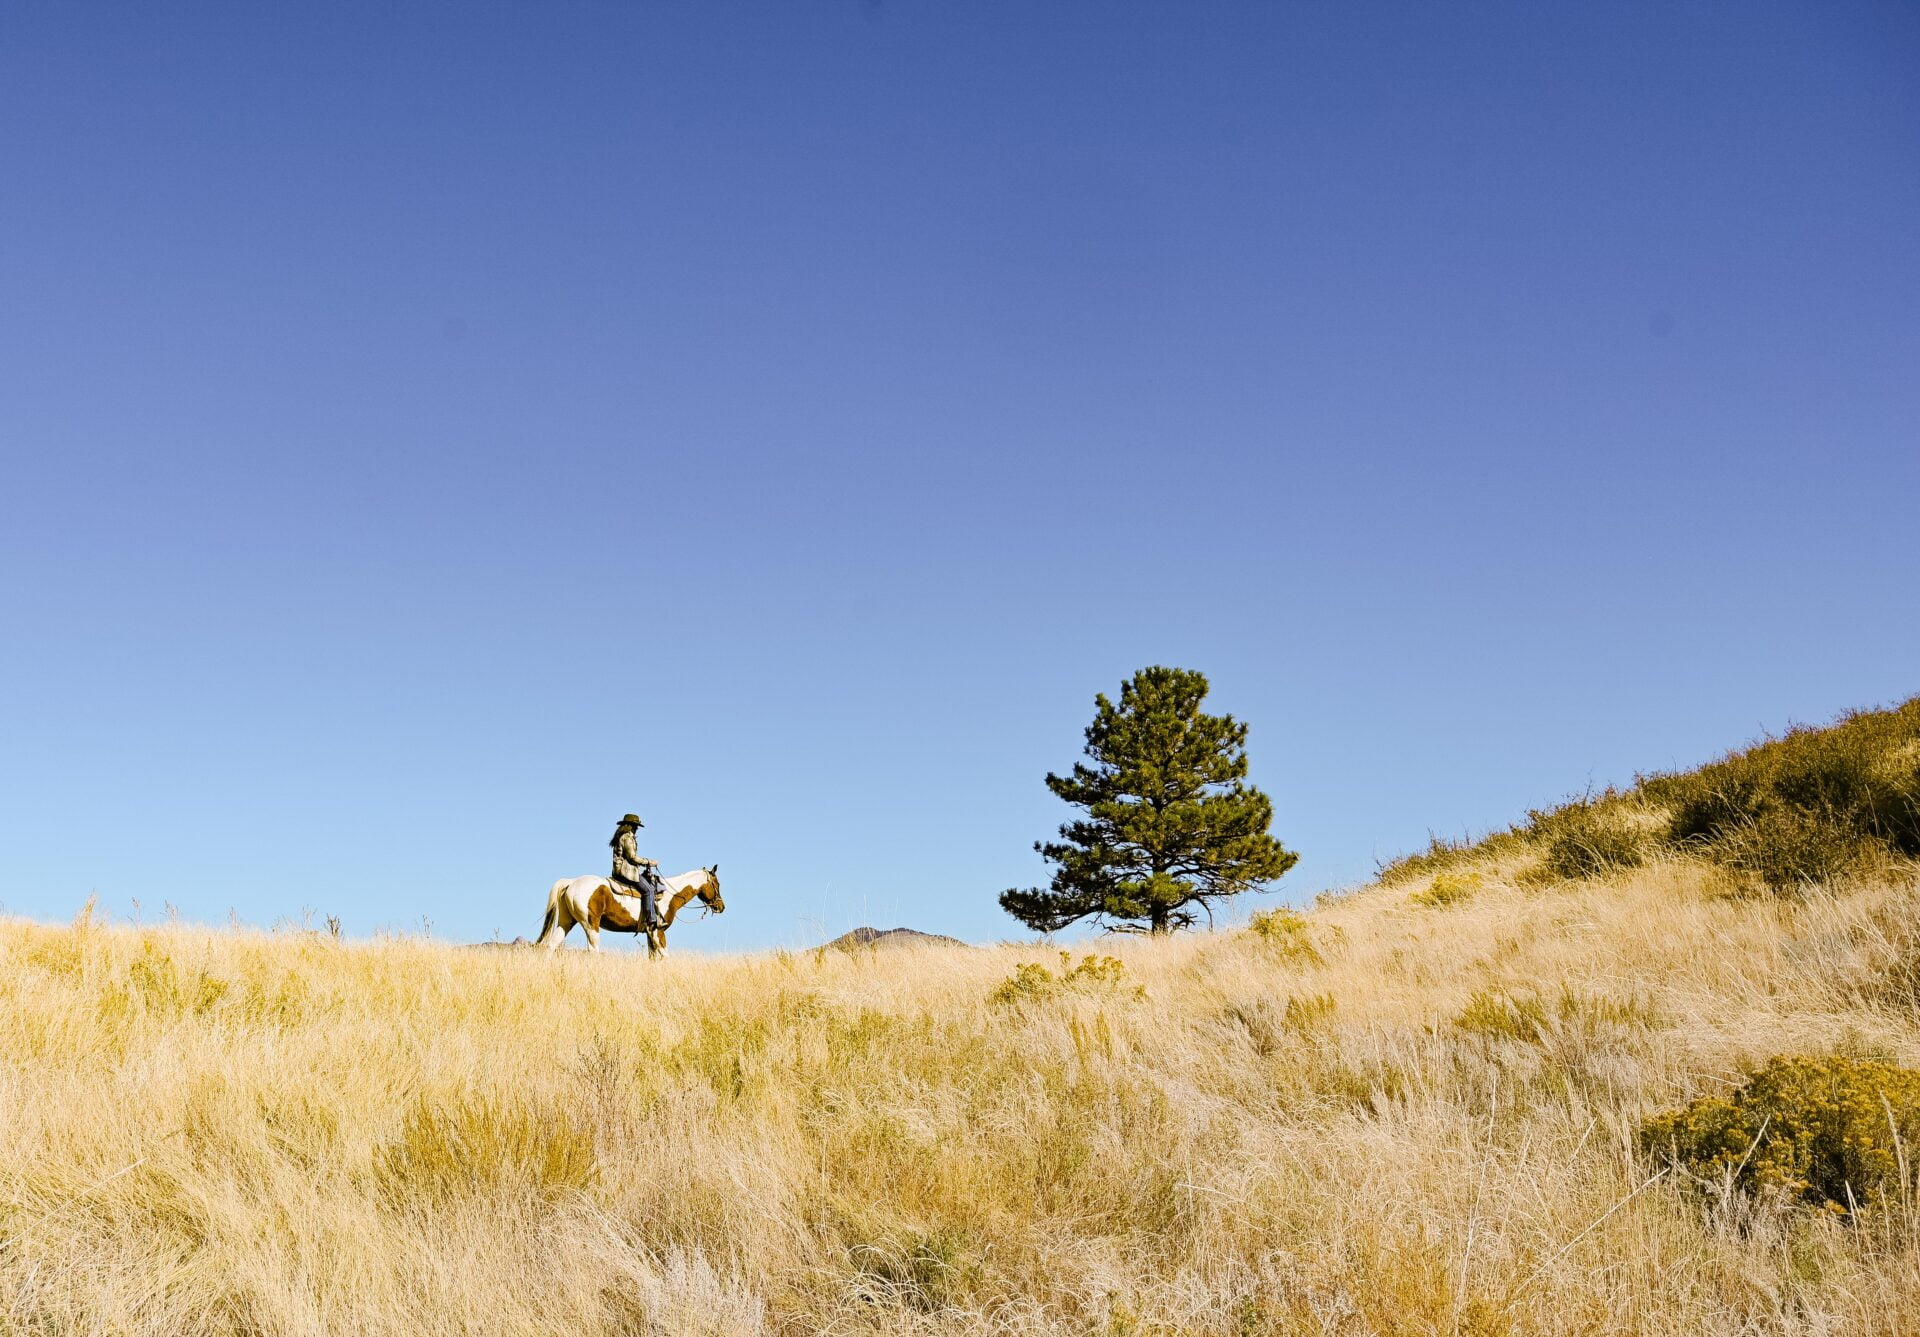 a woman sits on horseback off in the distance on the top of a grass covered hill